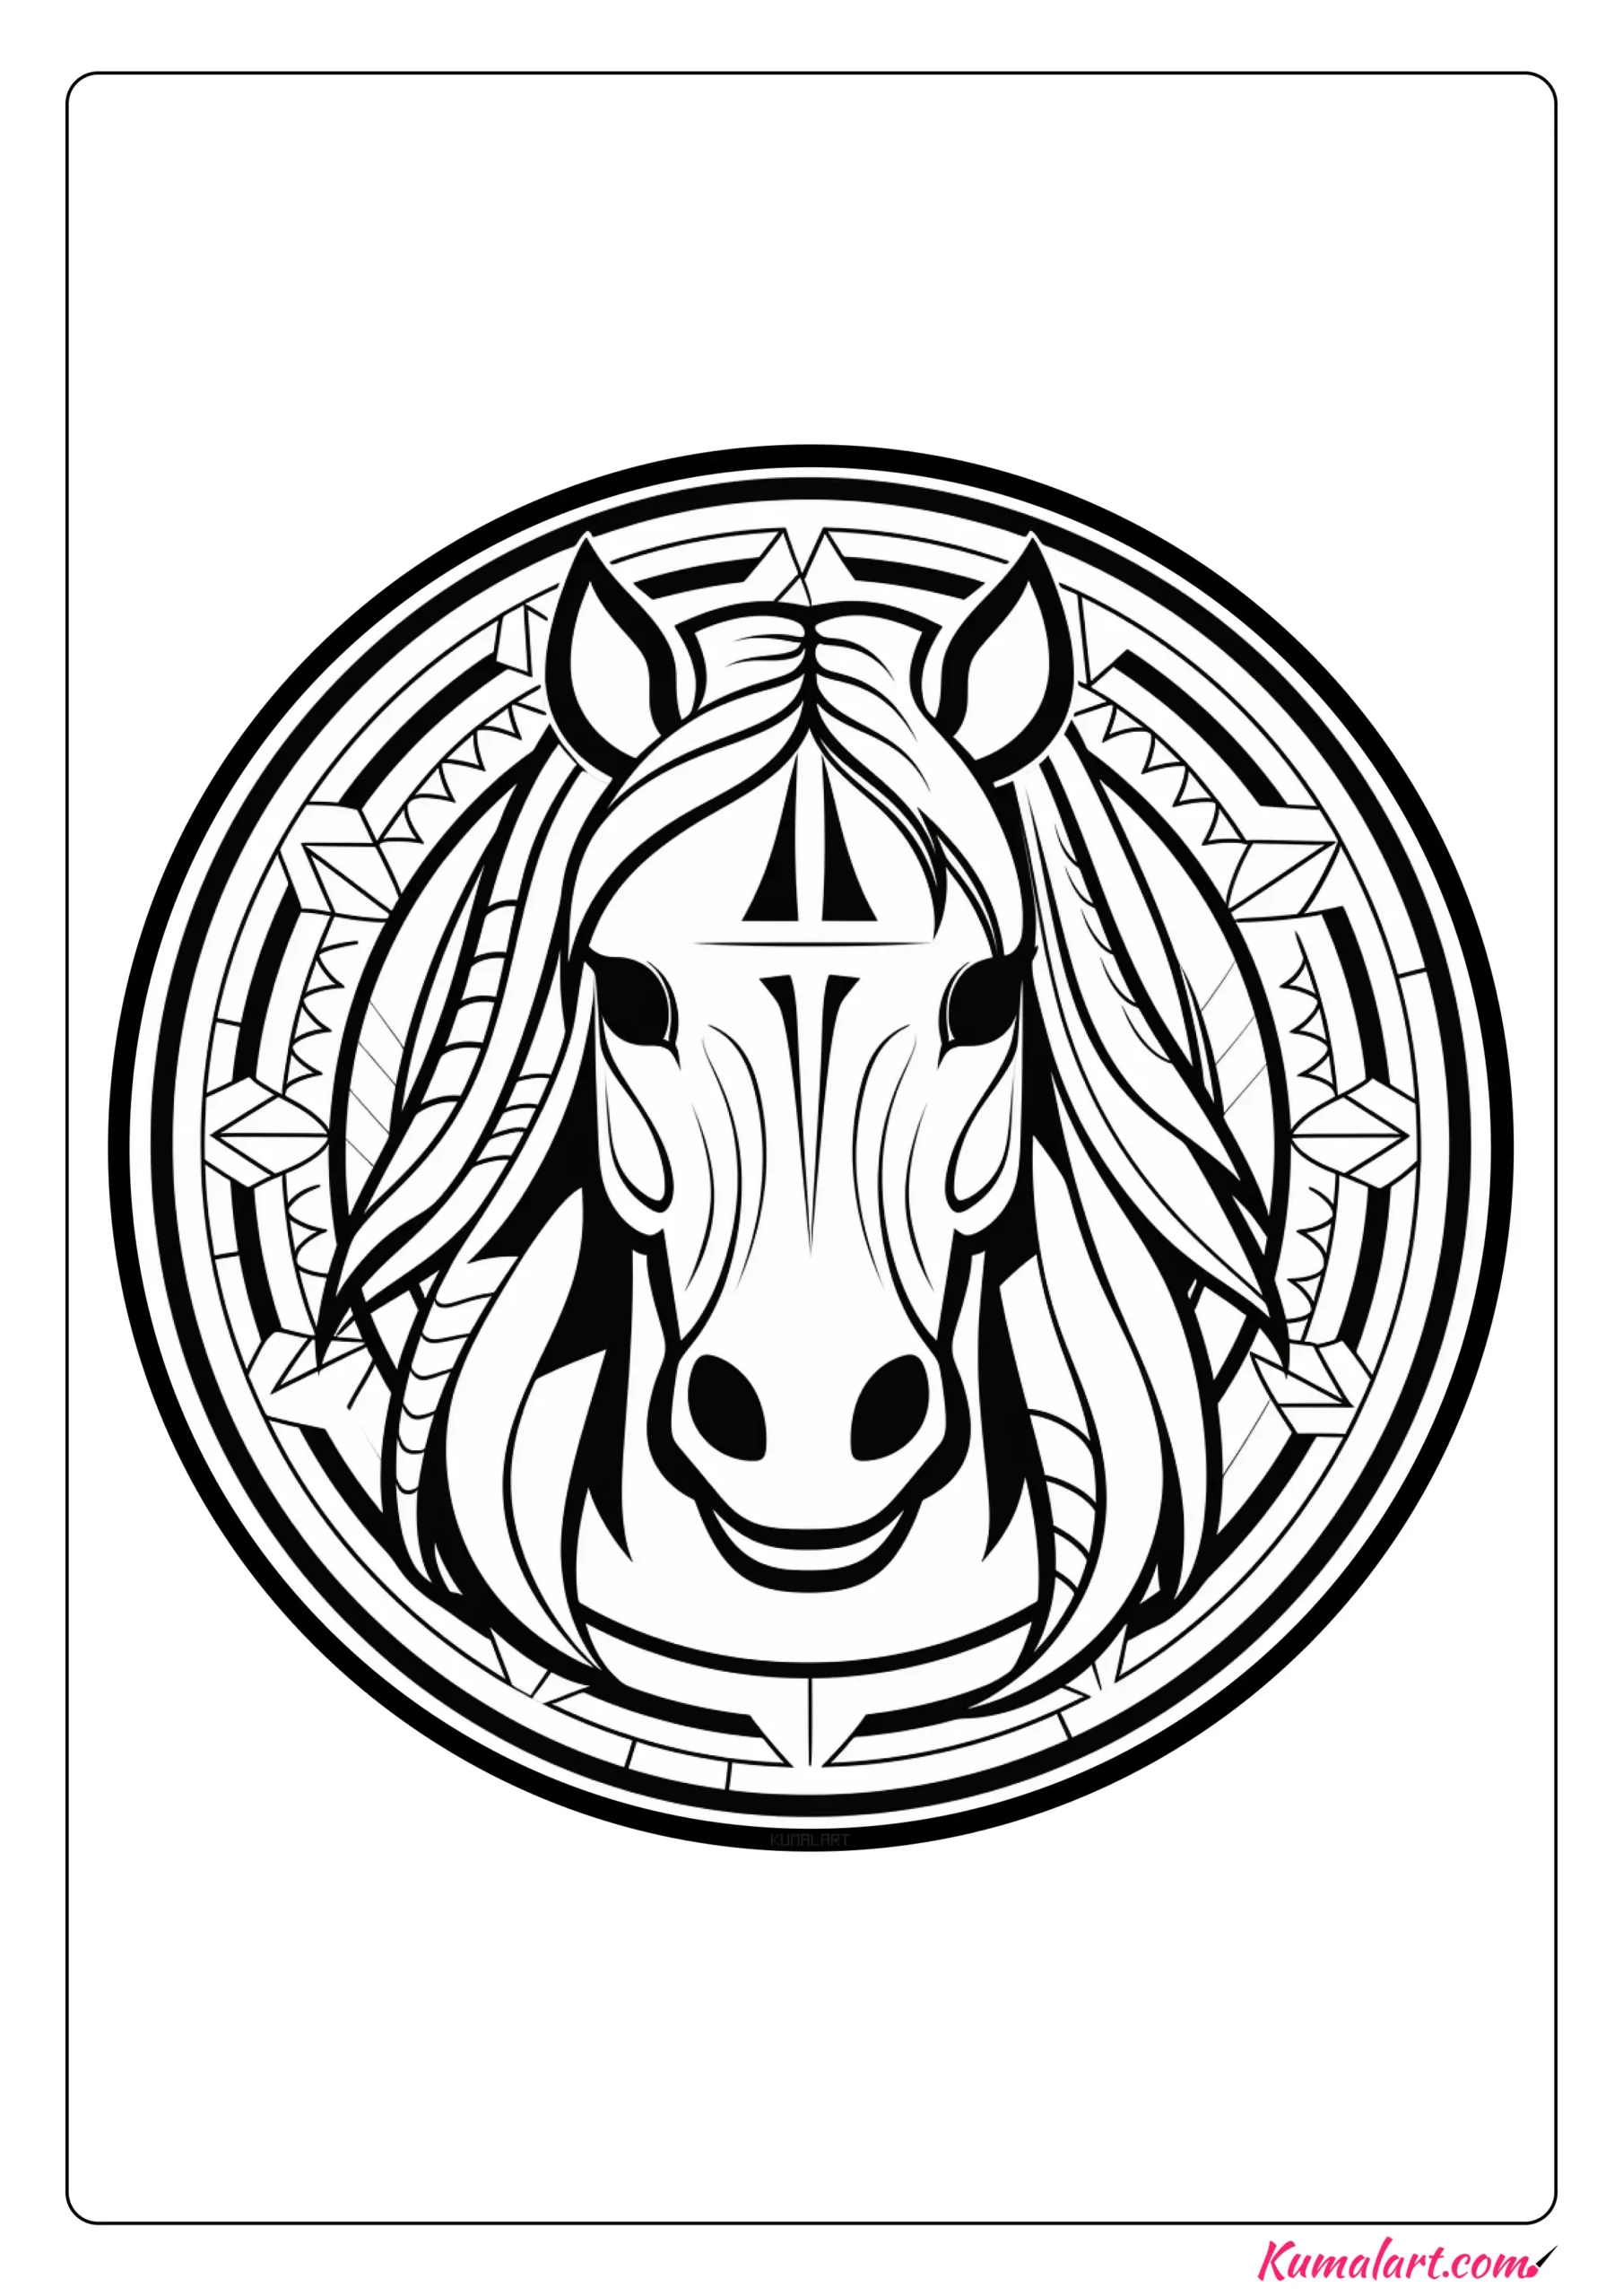 Max the Horse Coloring Page